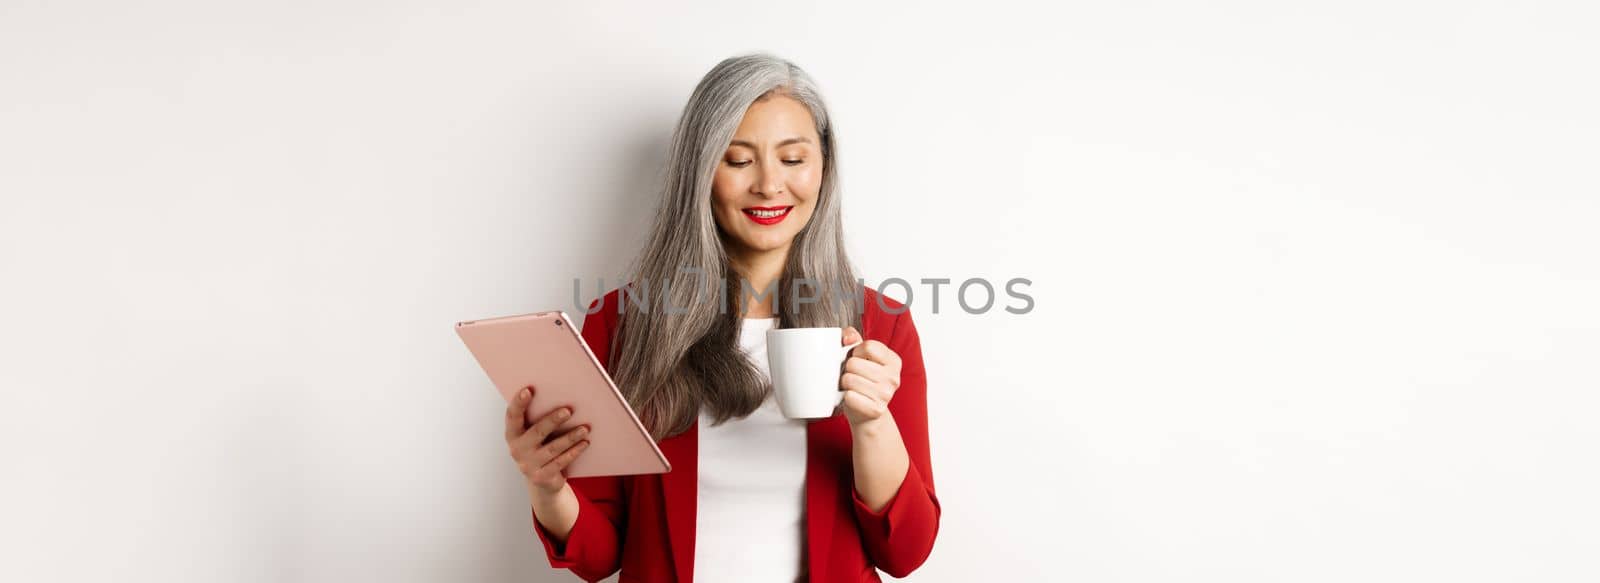 Business people concept. Asian mature businesswoman holding digital tablet and looking at coffee cup with pleased smile, standing over white background.